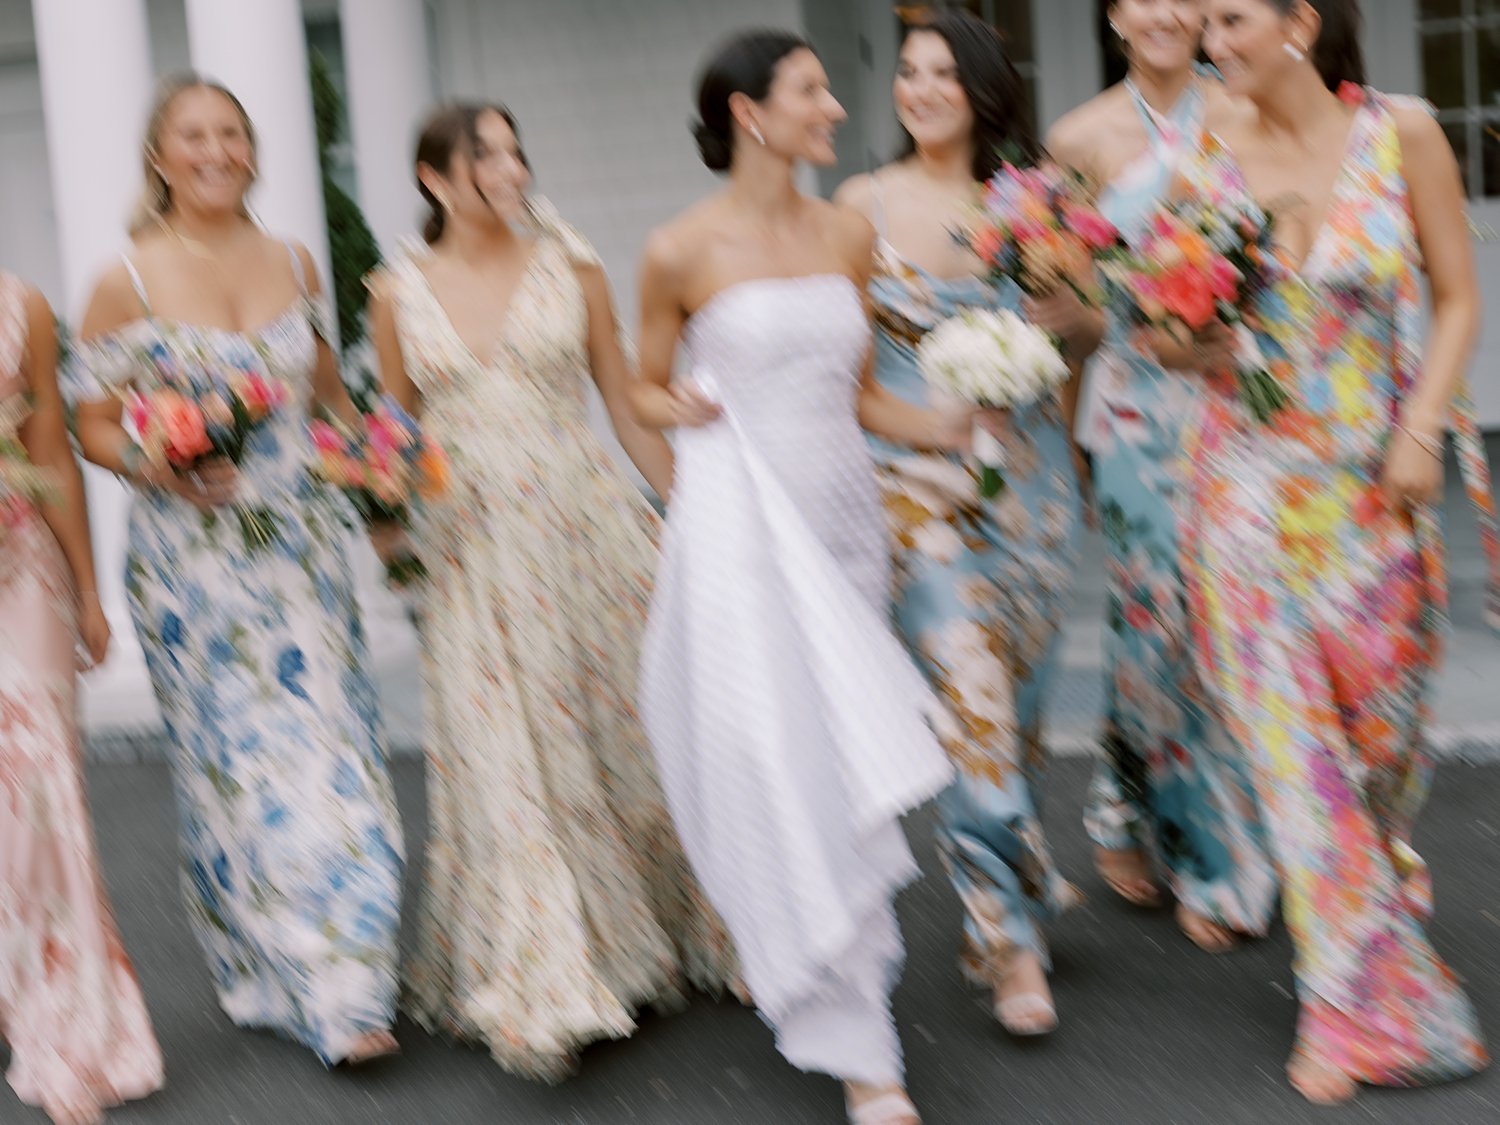 blurry photo of bride walking with bridesmaids in mismatched floral gowns